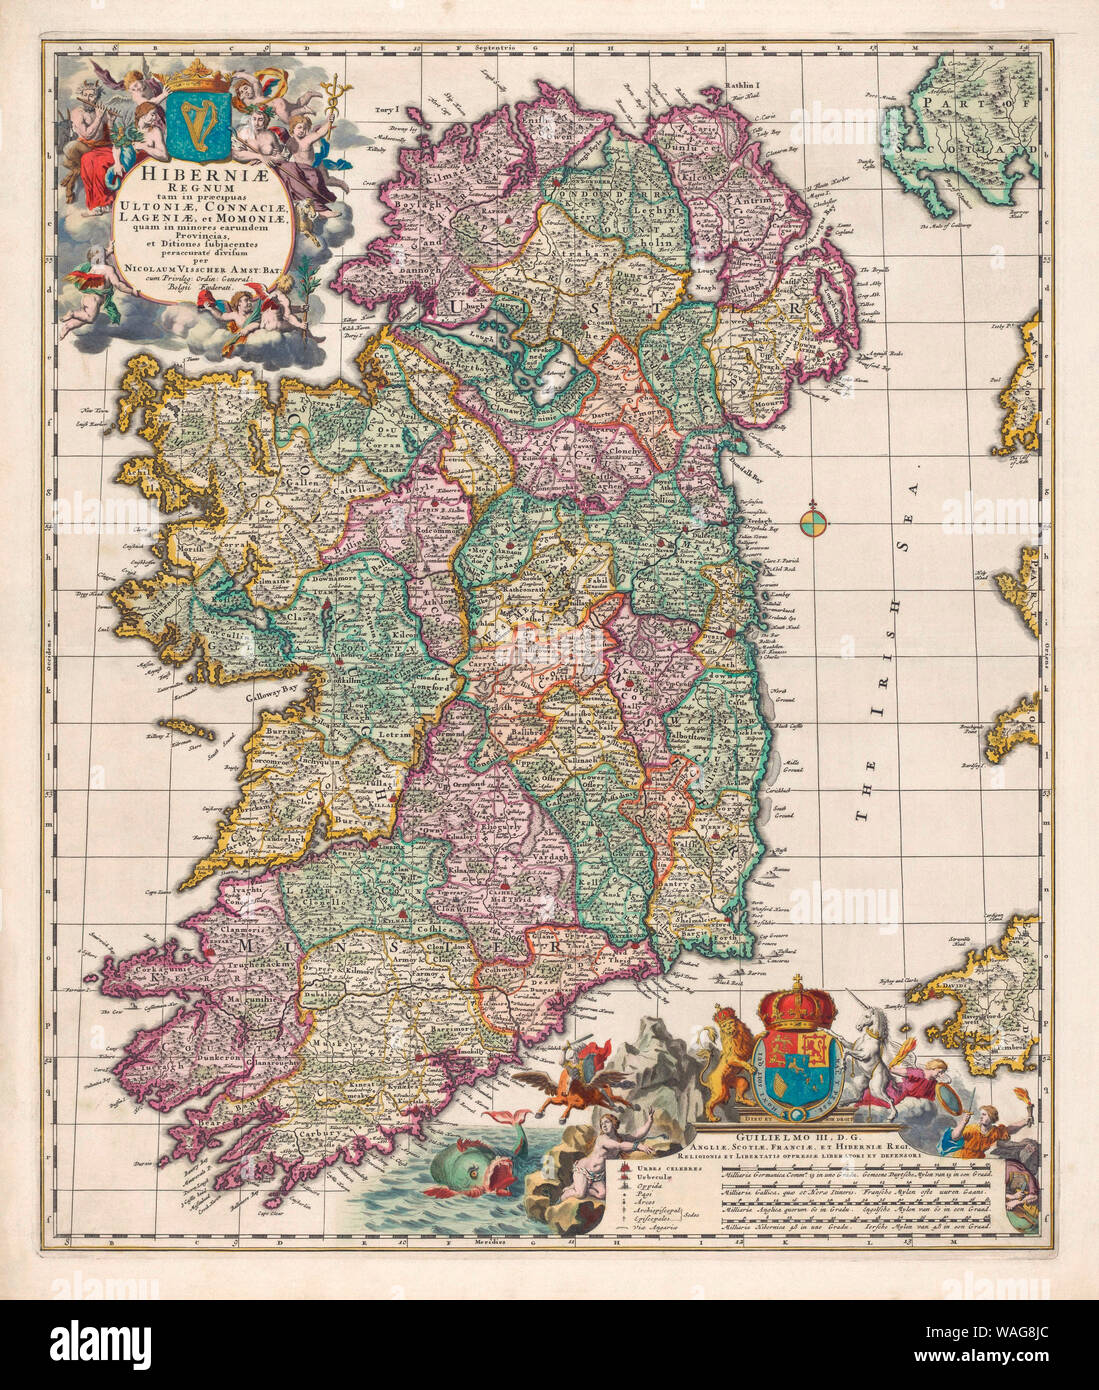 Map of Ireland circa 1650-1675 by Dutch engraver, cartographer and publisher Nicolaes Visscher 1 Stock Photo